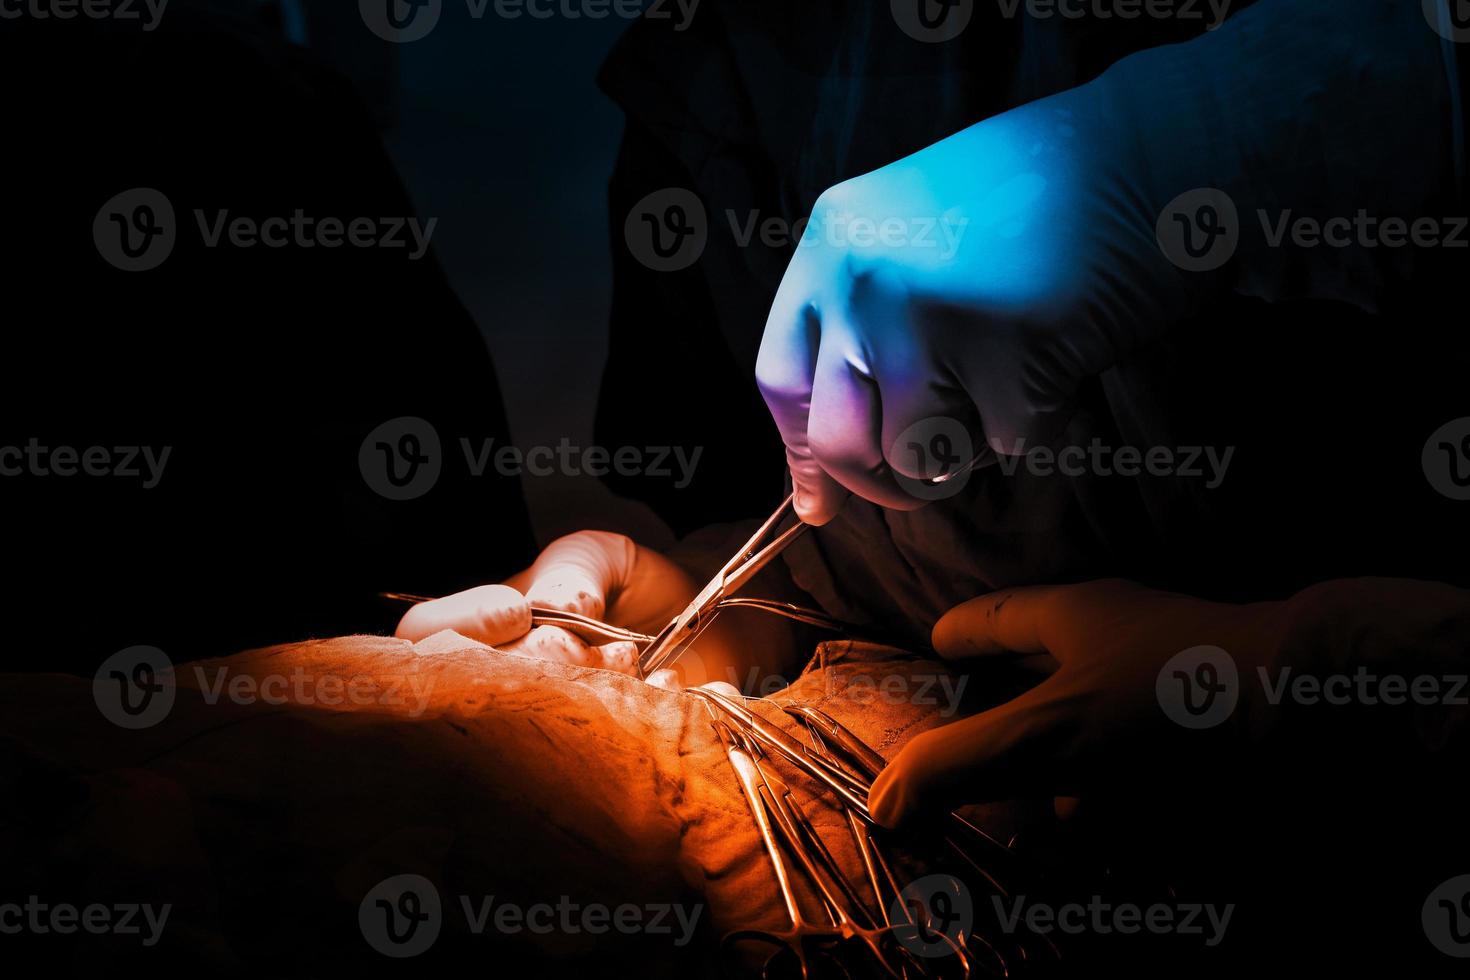 Pictures of surgery performed by a specialist surgeon. Color tones distinguish blue and orange. photo